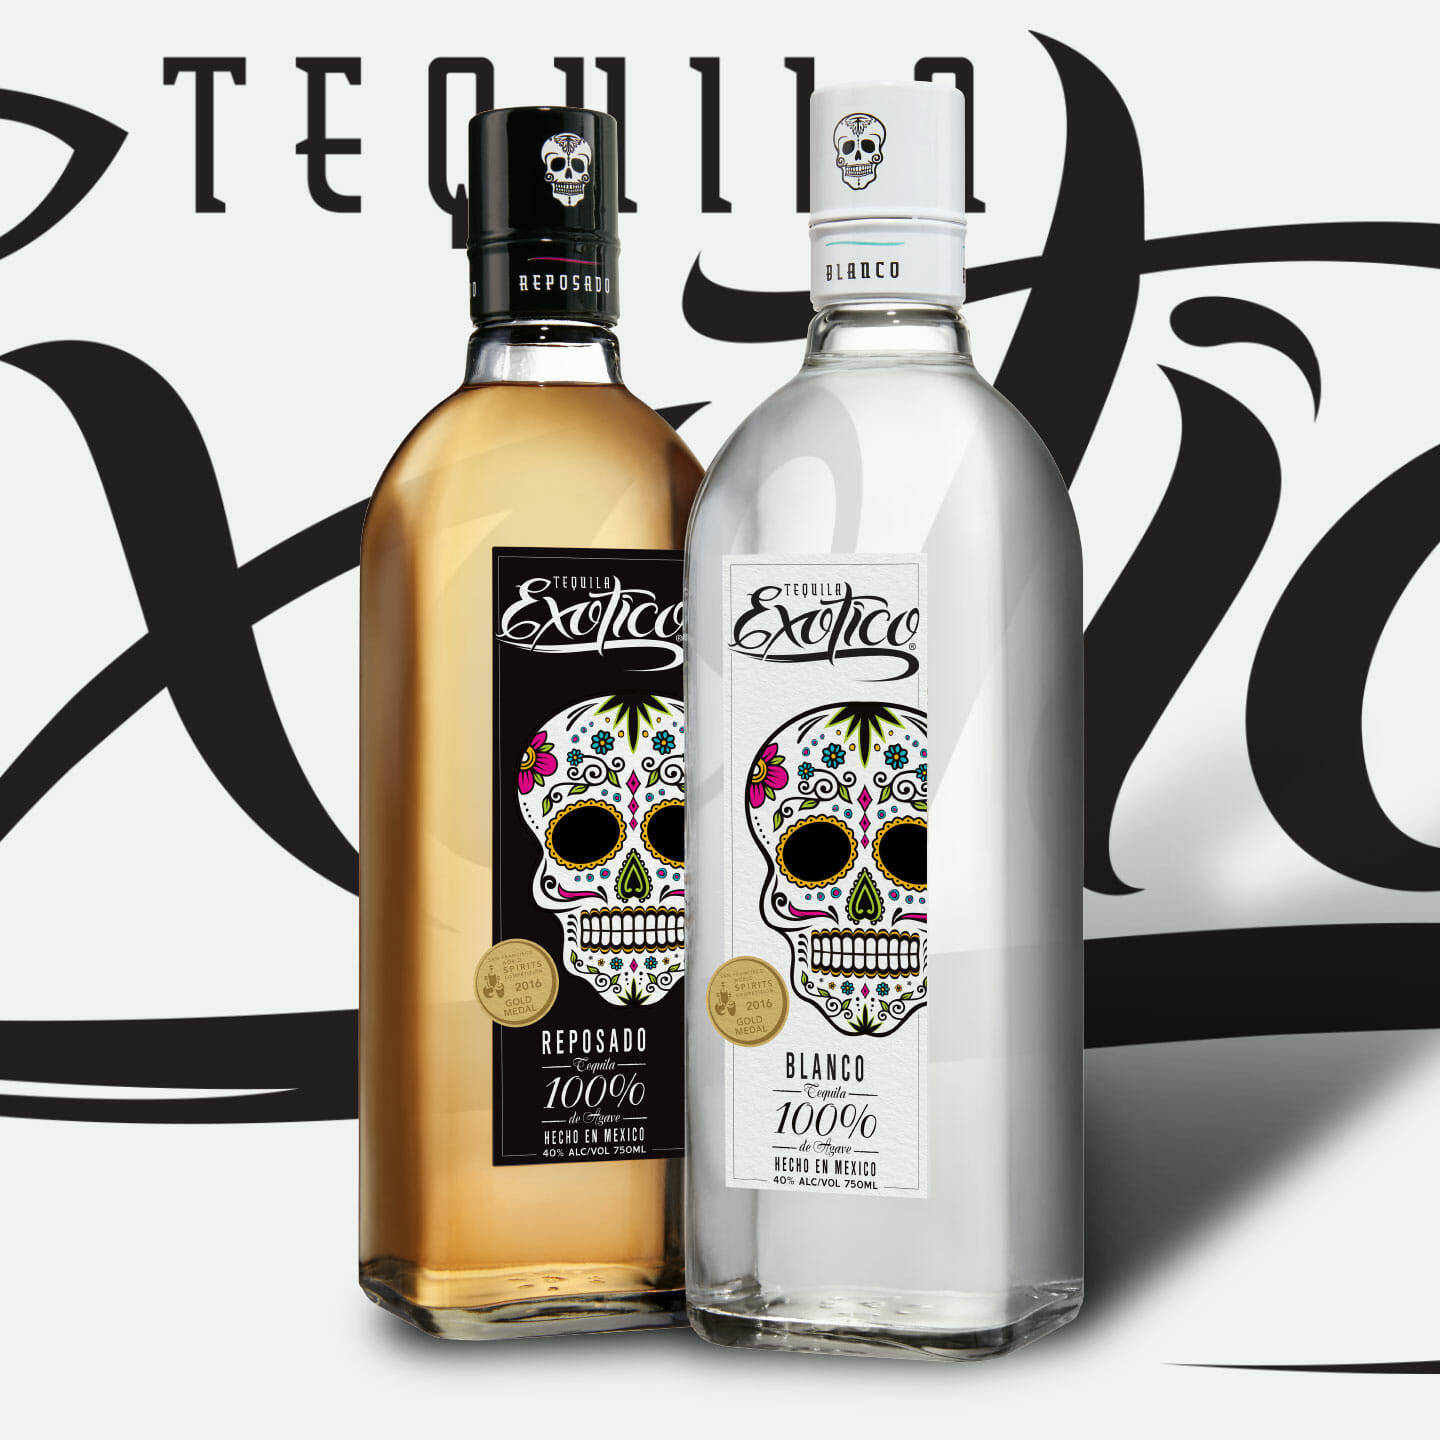 Exotico Tequila Graphic Art Poster Background